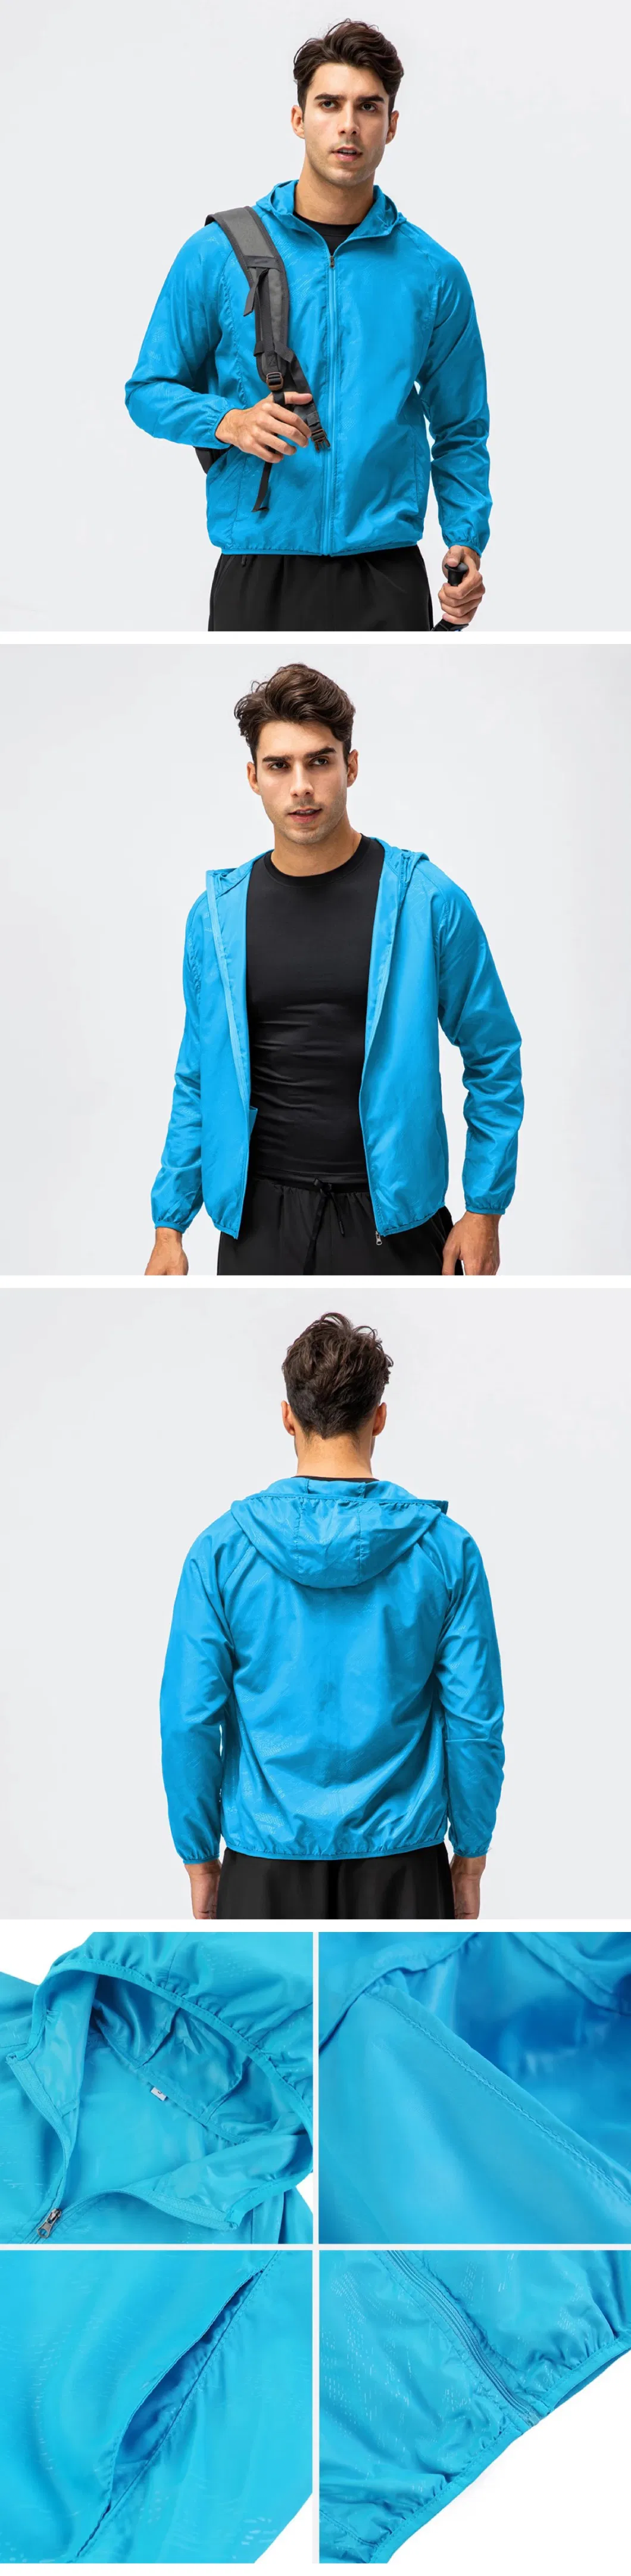 Hot Selling Portable Unisex Lightweight Sports Top Windbreaker Mens Cycling Jacket Manufacturer, Private Label Zip up Workout Athletic Track Jackets for Women